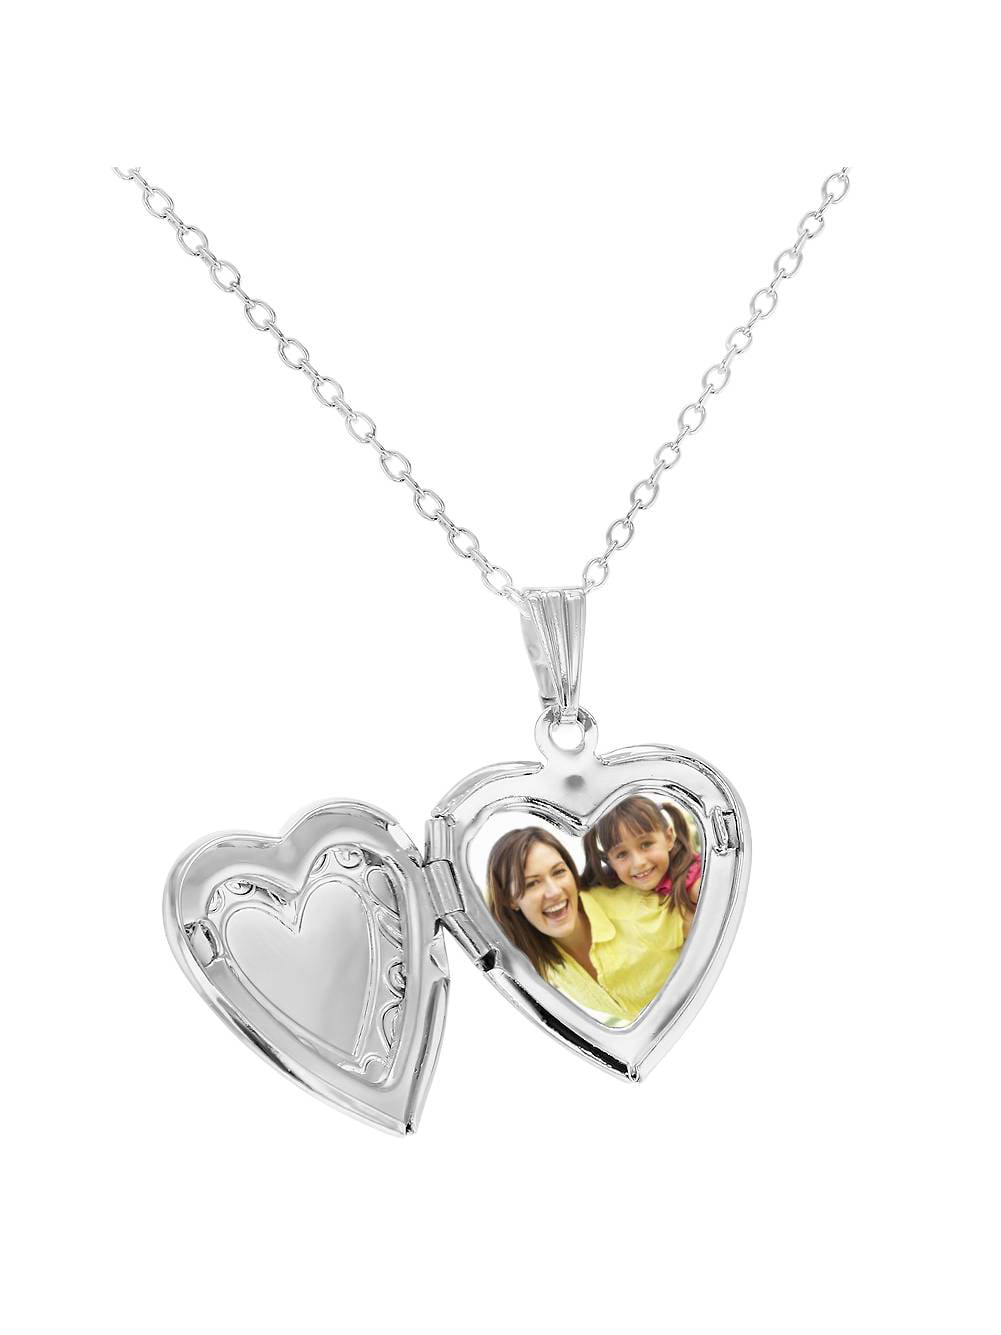 Gift for Women Girls Kids U7 Custom Any Picture Locket Necklace 925 Sterling Silver Tiny Heart Lockets Personalized Memory Full Color Photos Pendant with Chain 16-22 Inch 